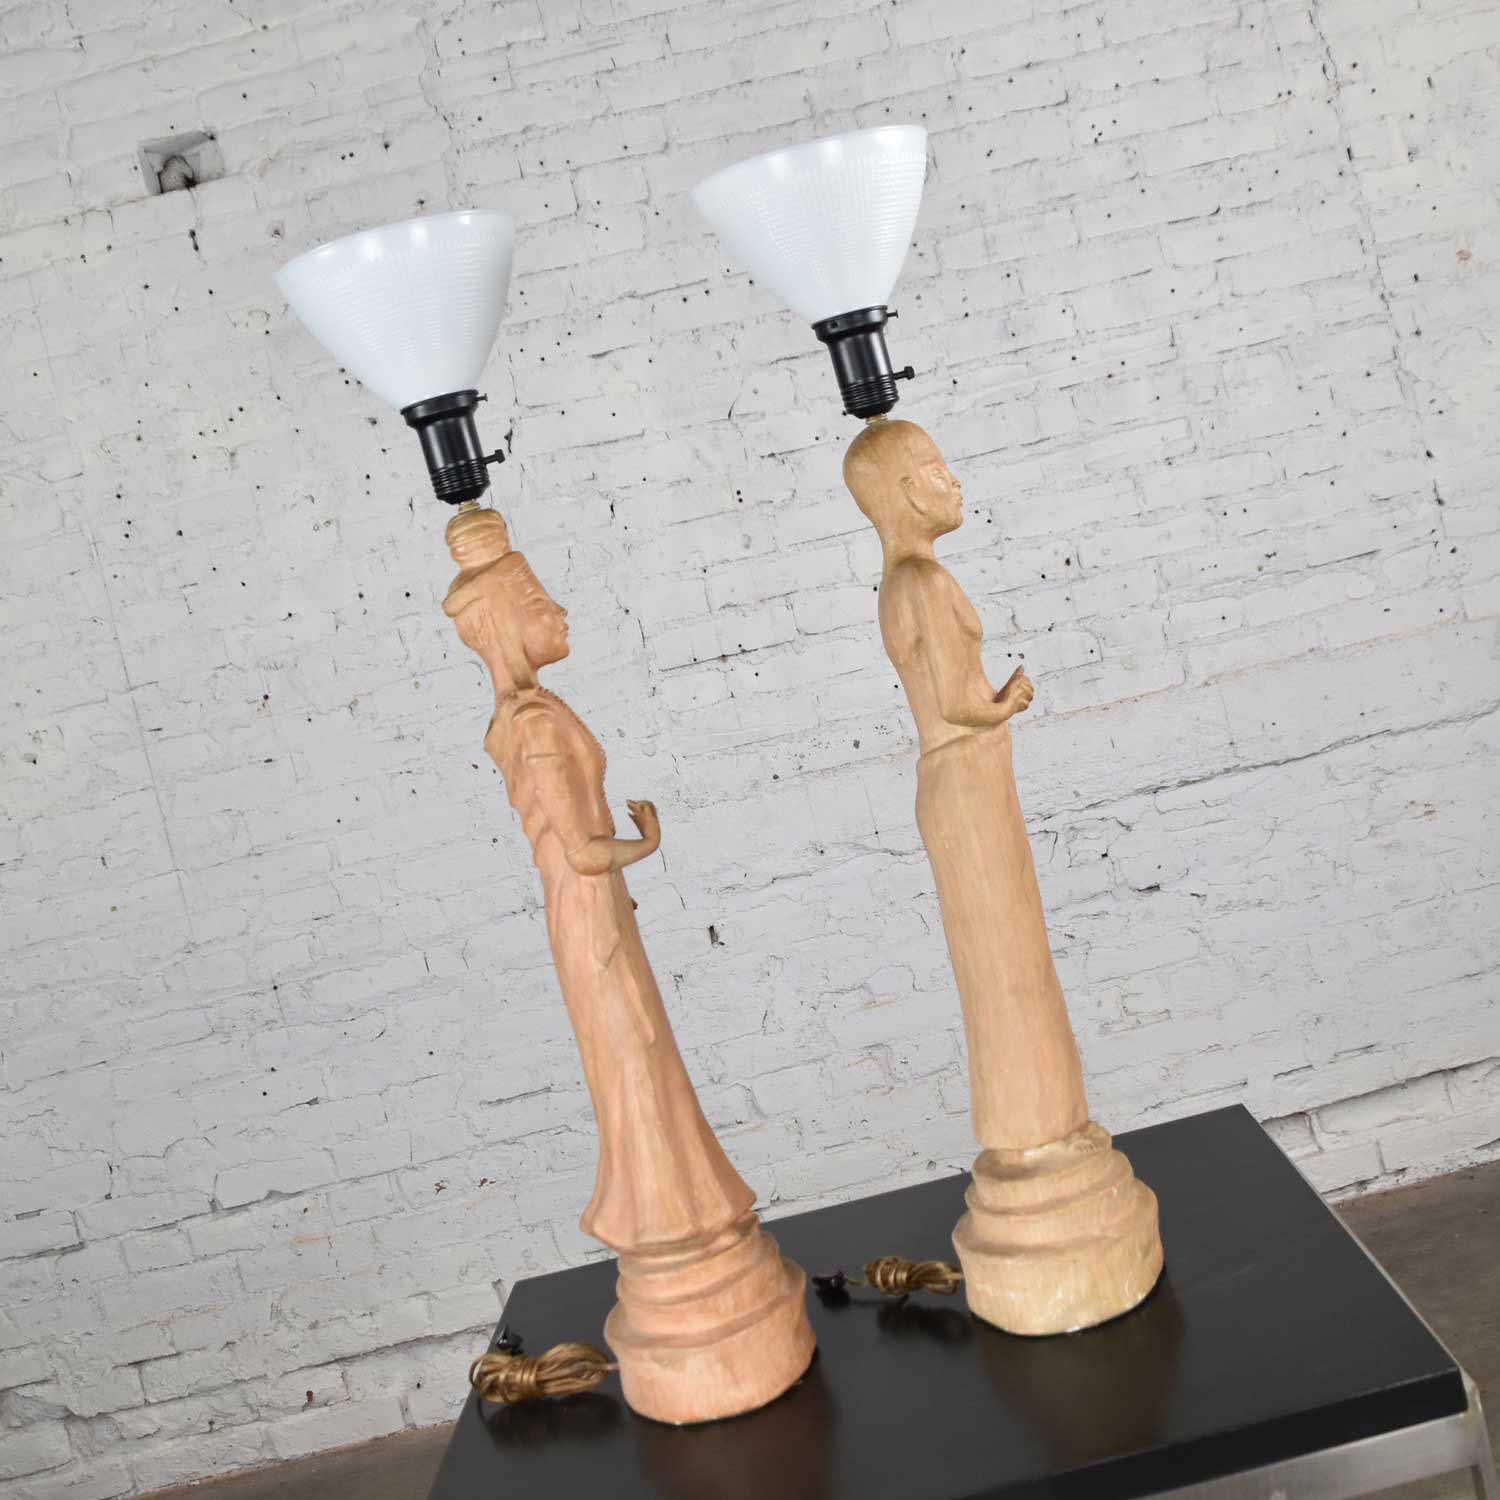 Hollywood Regency Asian Figural Lamps Style of James Mont w/ Black Tapered Shades